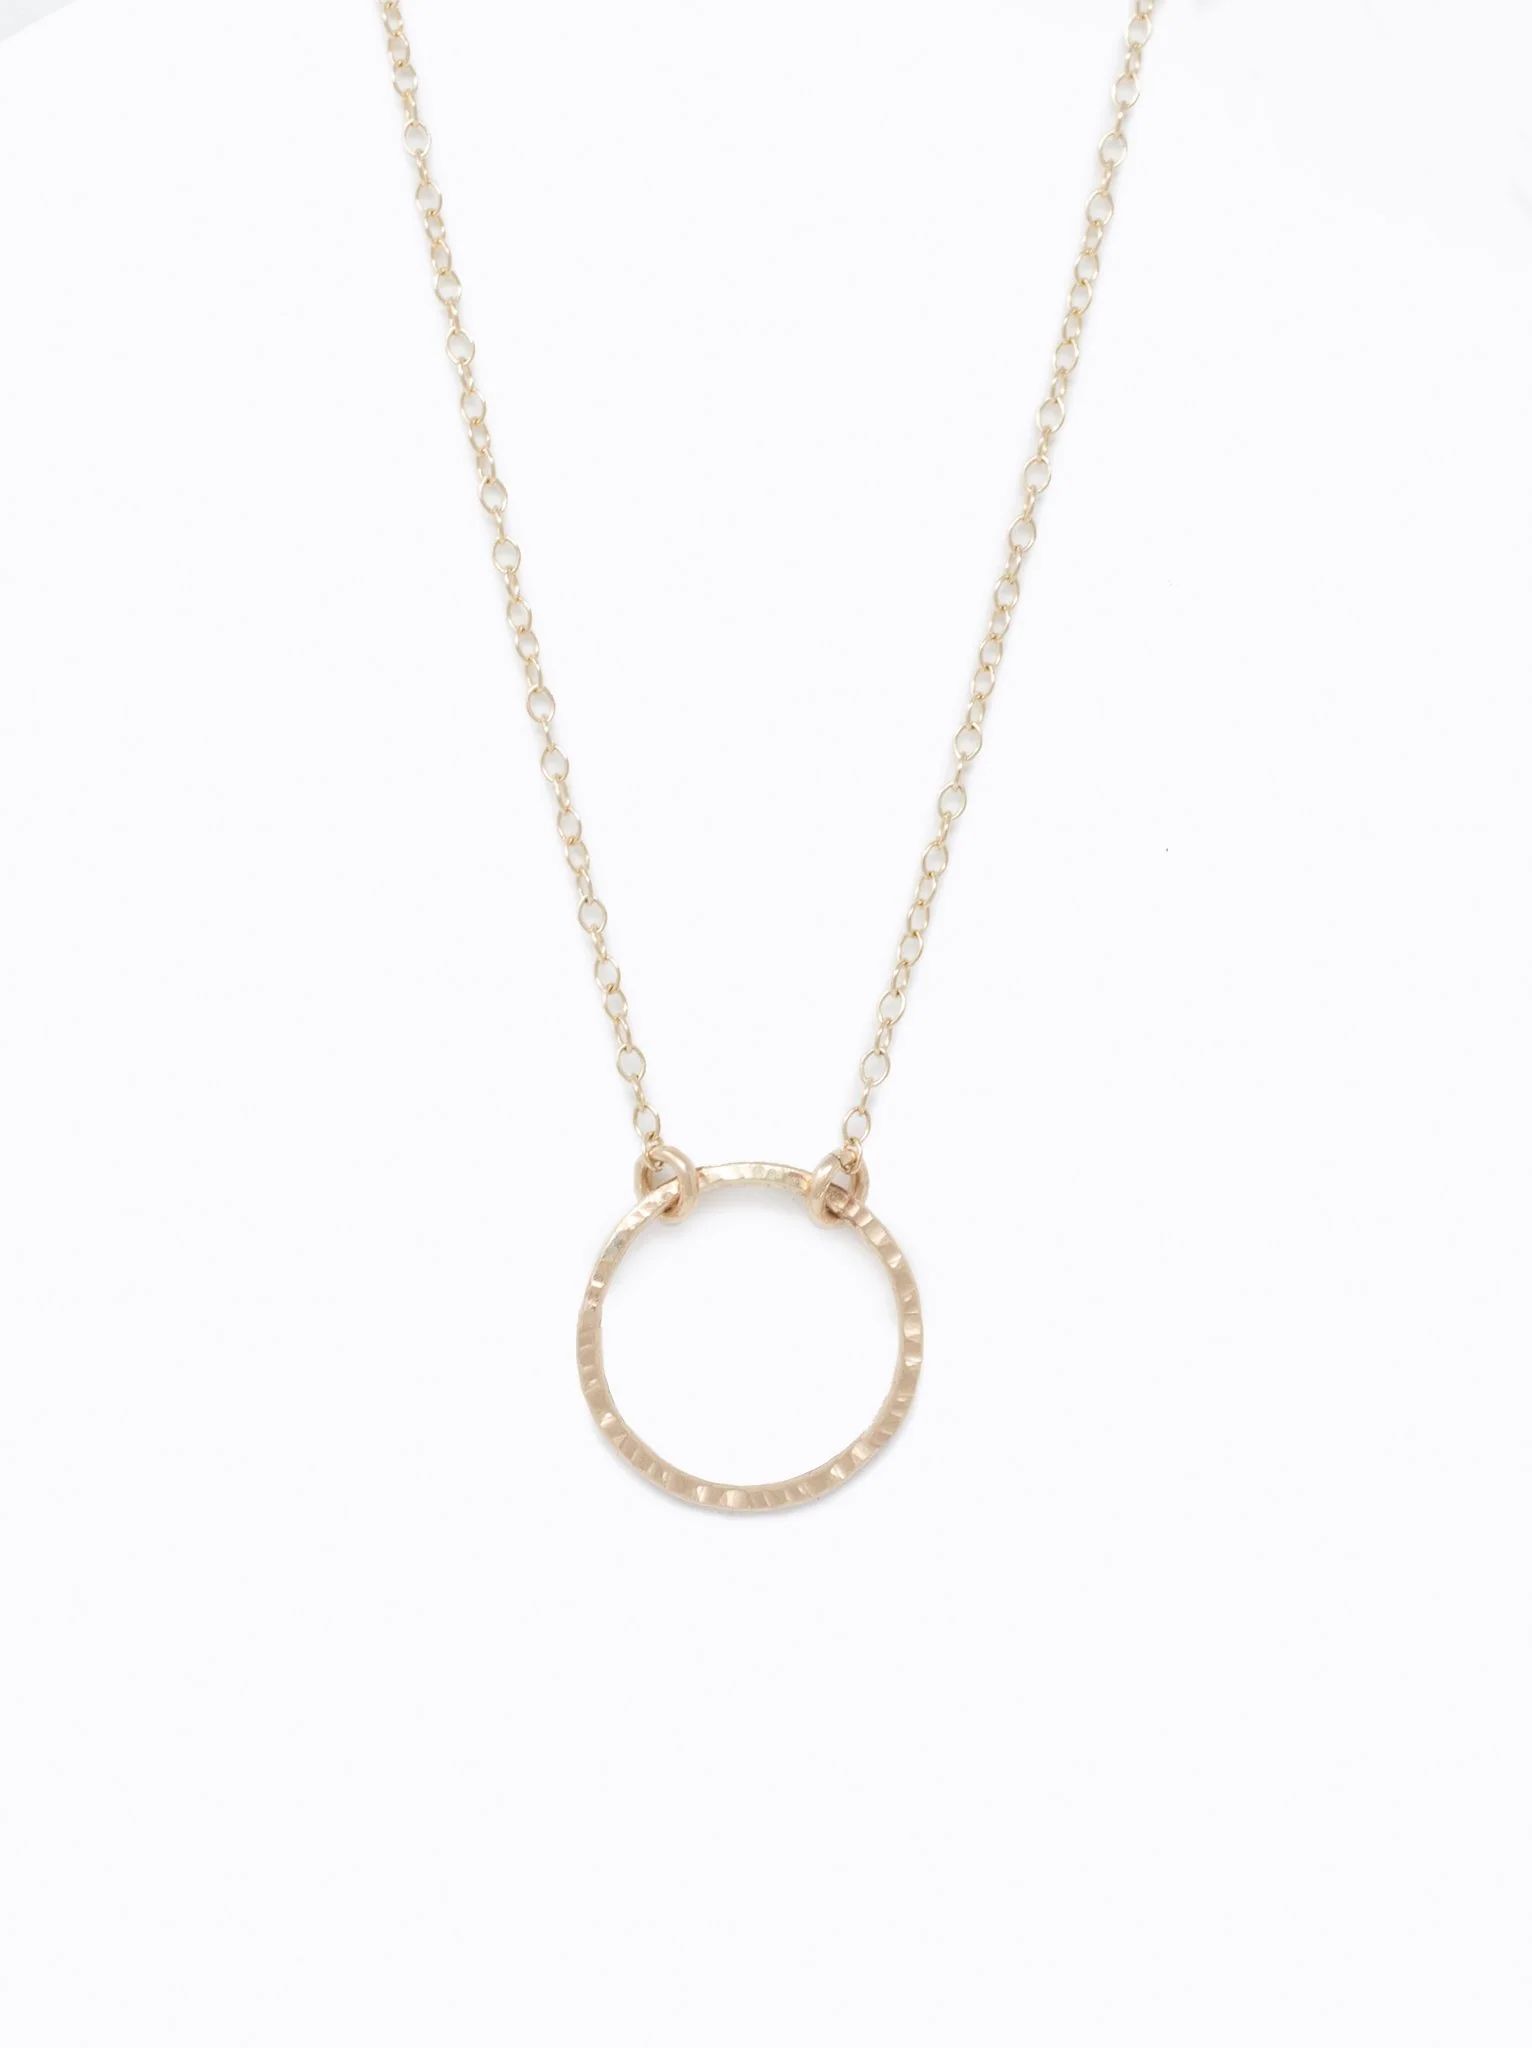 Floating Shapes Necklace | ABLE